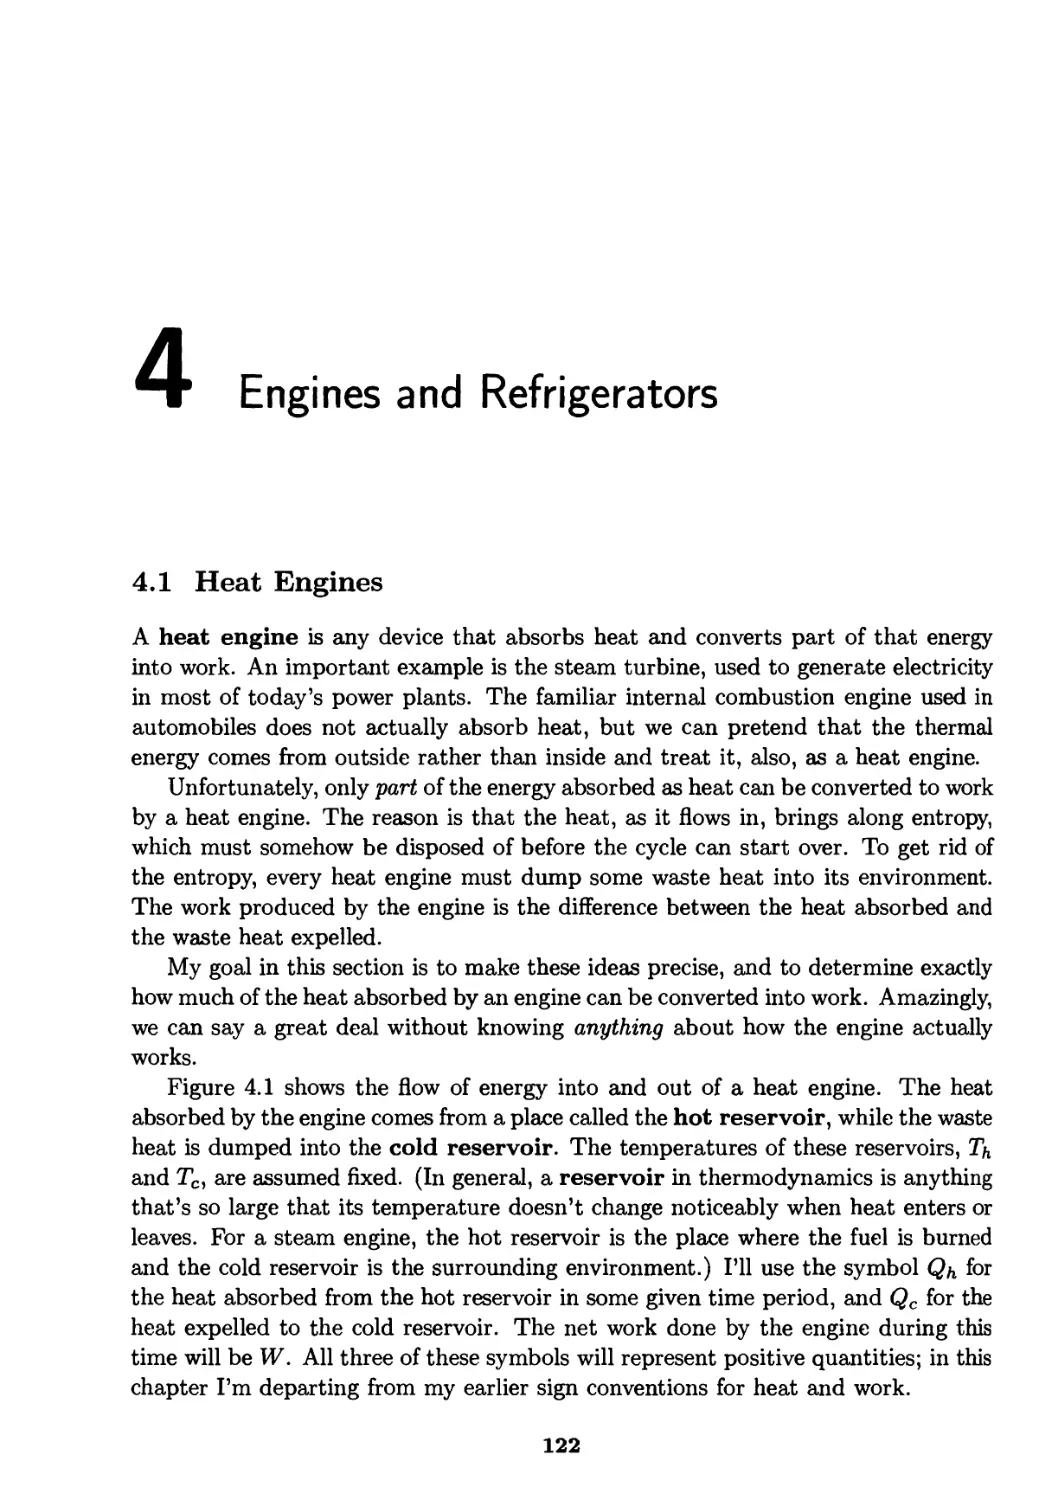 Part II: Thermodynamics
Chapter 4. Engines and Refrigerators